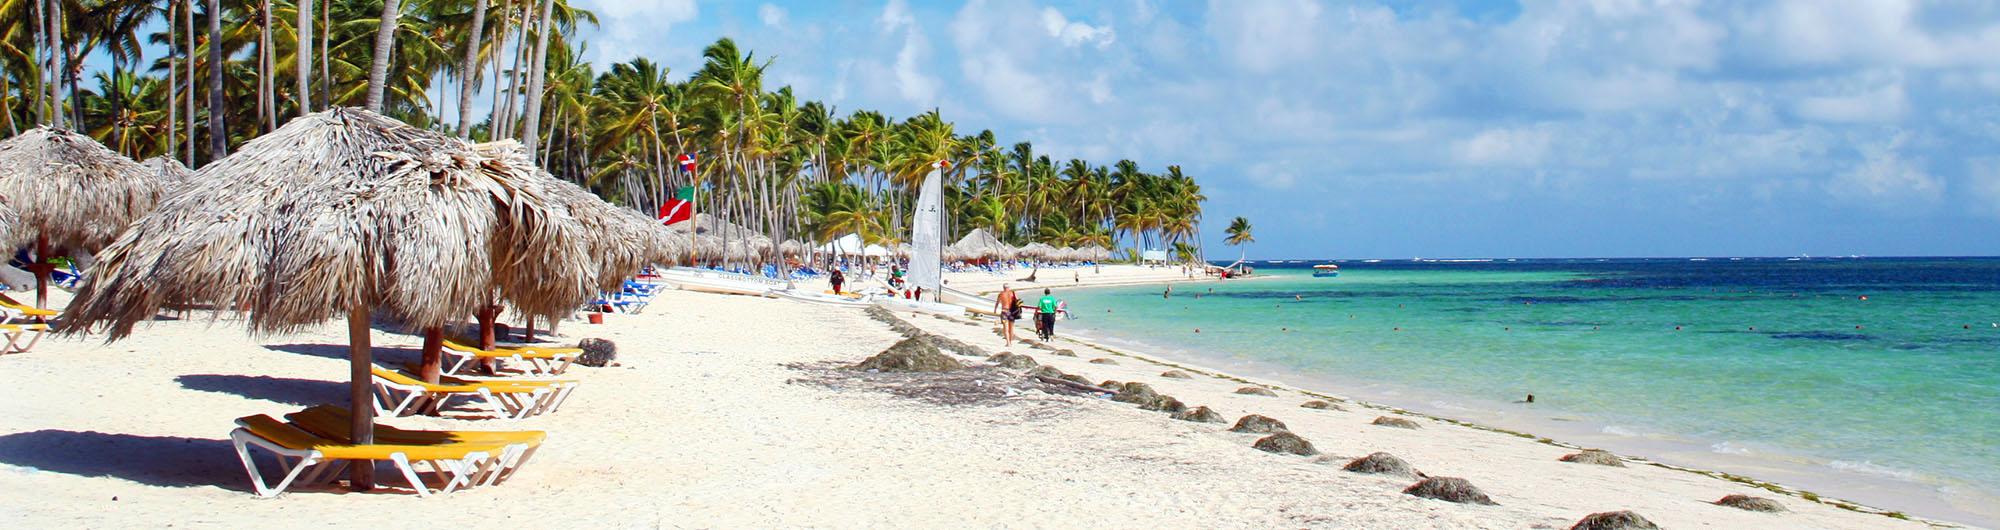 Search and compare cheap flights from Saint Thomas Island to Punta Cana